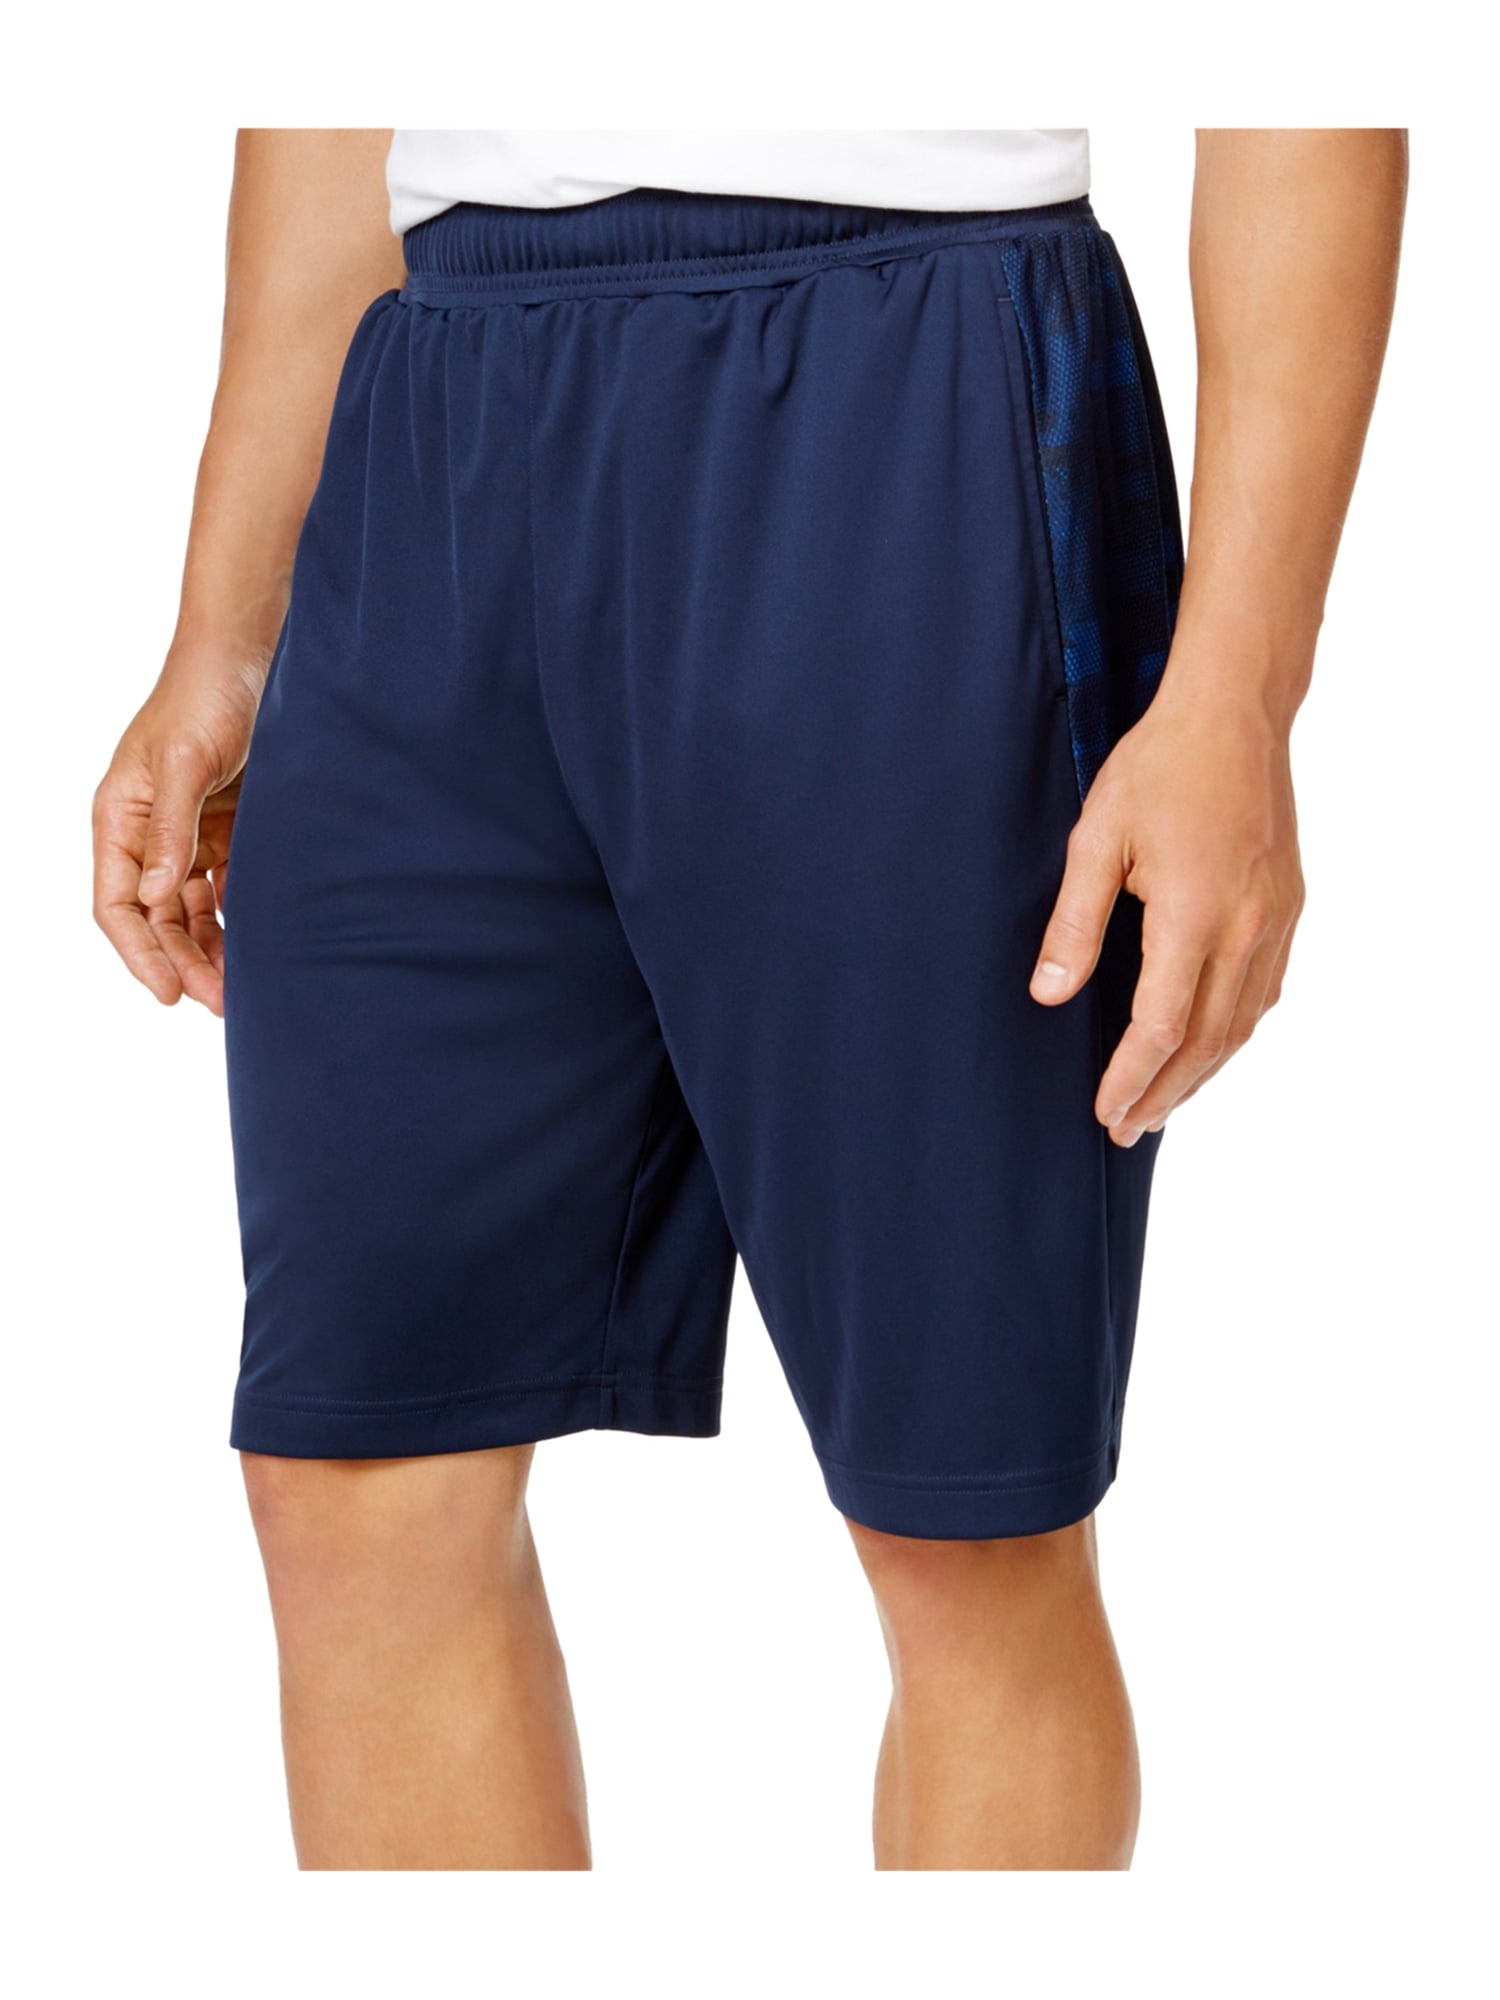 Best Walmart mens workout shorts for Push Pull Legs